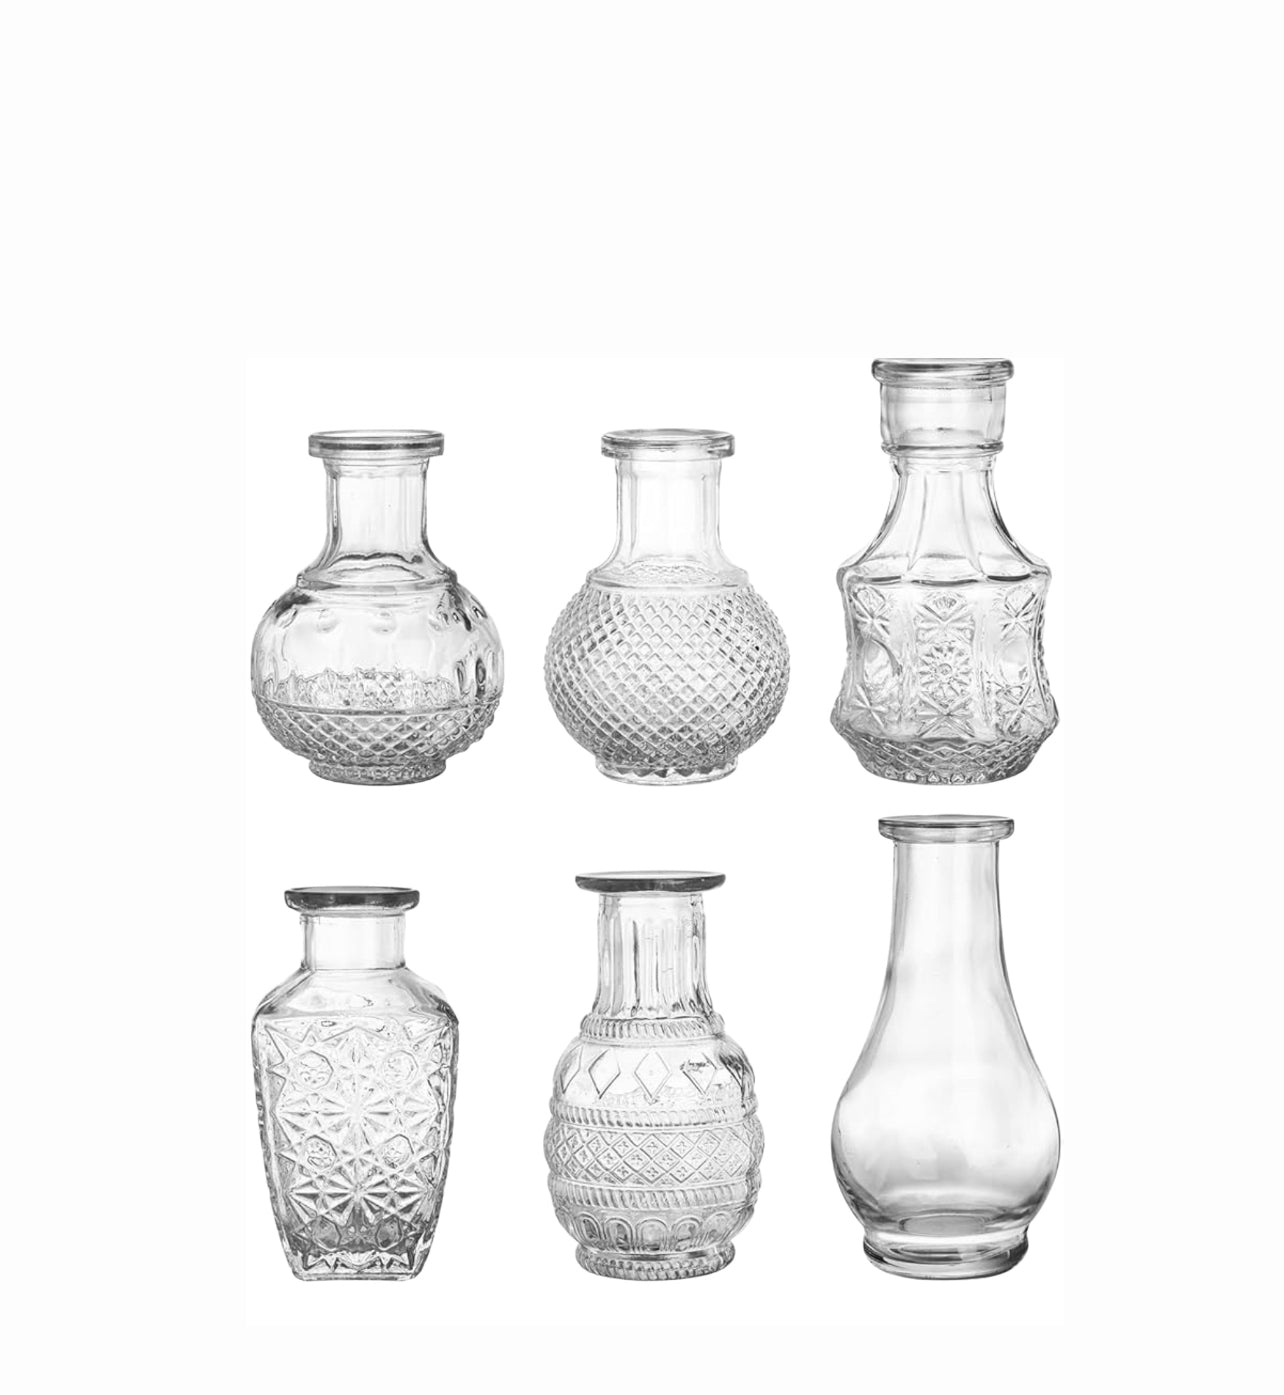 Wedding & Event Modern Glass Vases - Mixed Sizes x79 Available for hire at Rockhampton Vintage Hire